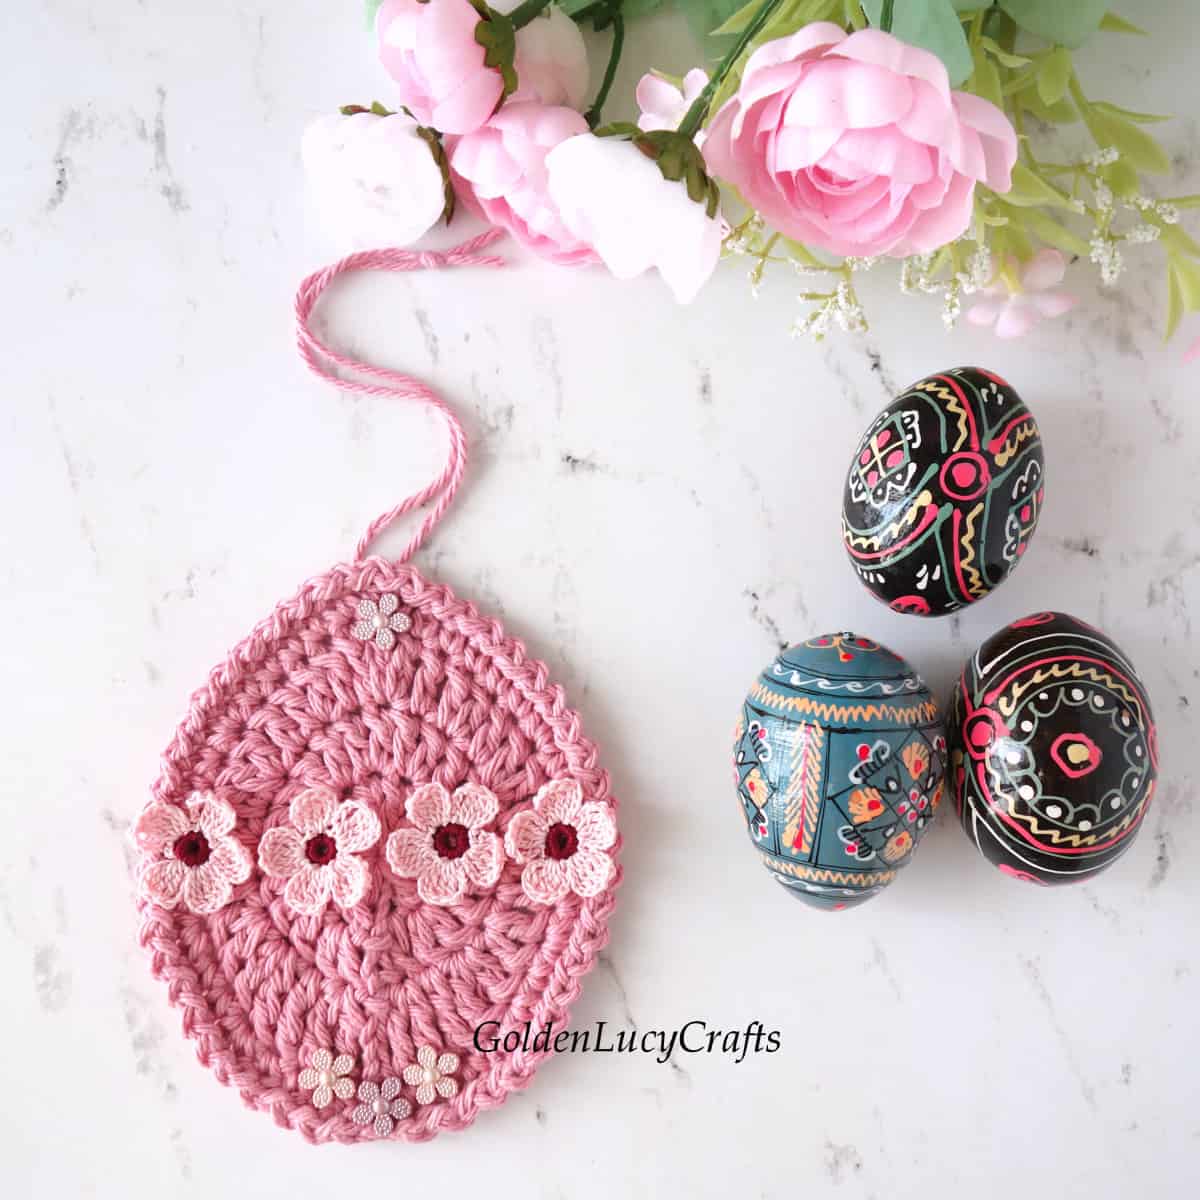 Crocheted Easter egg ornament embellished with small flowers, three wooden painted eggs next to it.